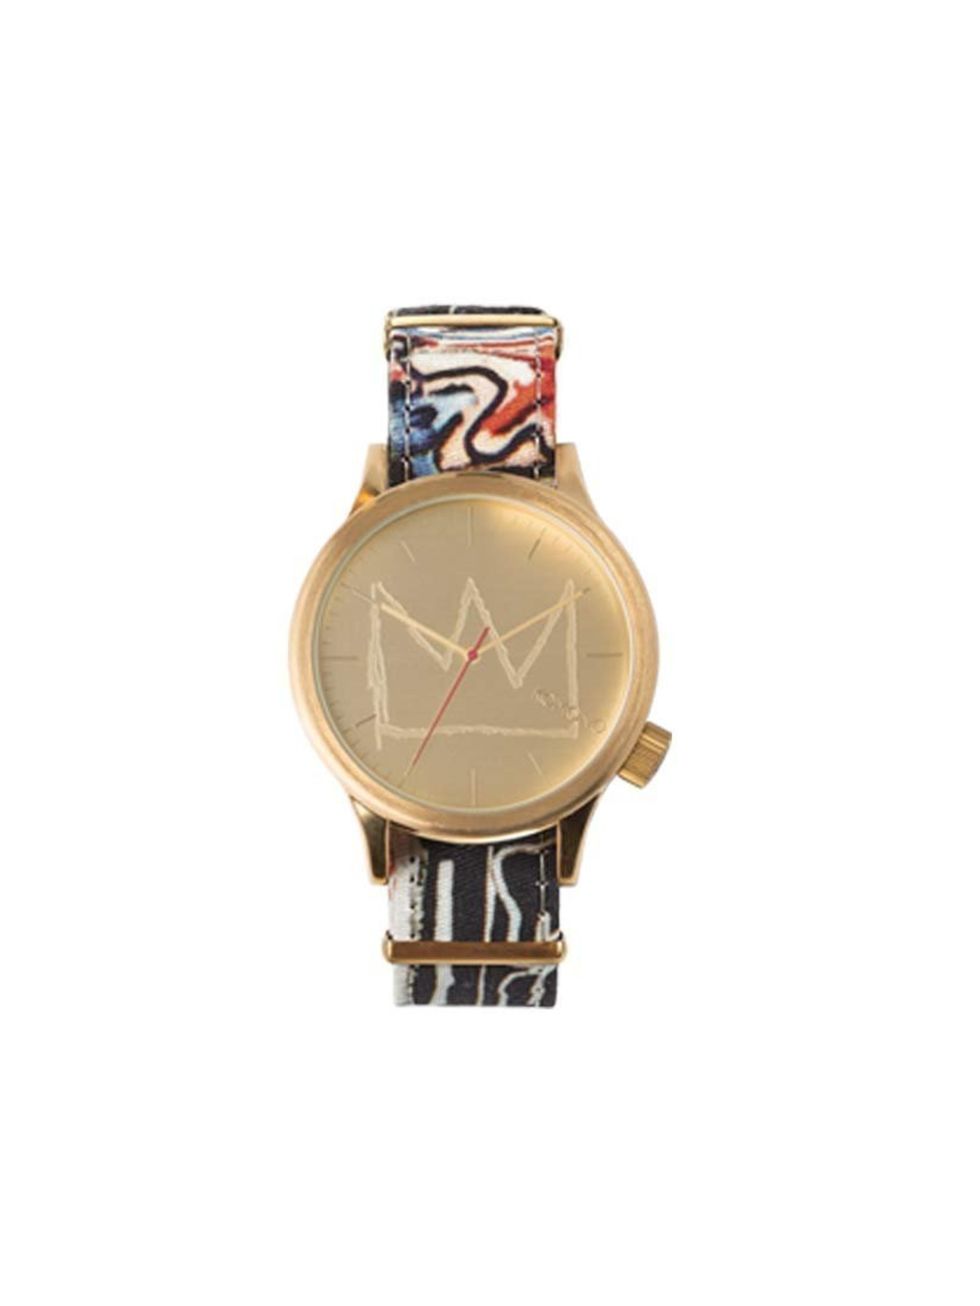 Jean Michel Basquiat's work packaged into a little piece of art that you can wear everyday. Komono watch, £70